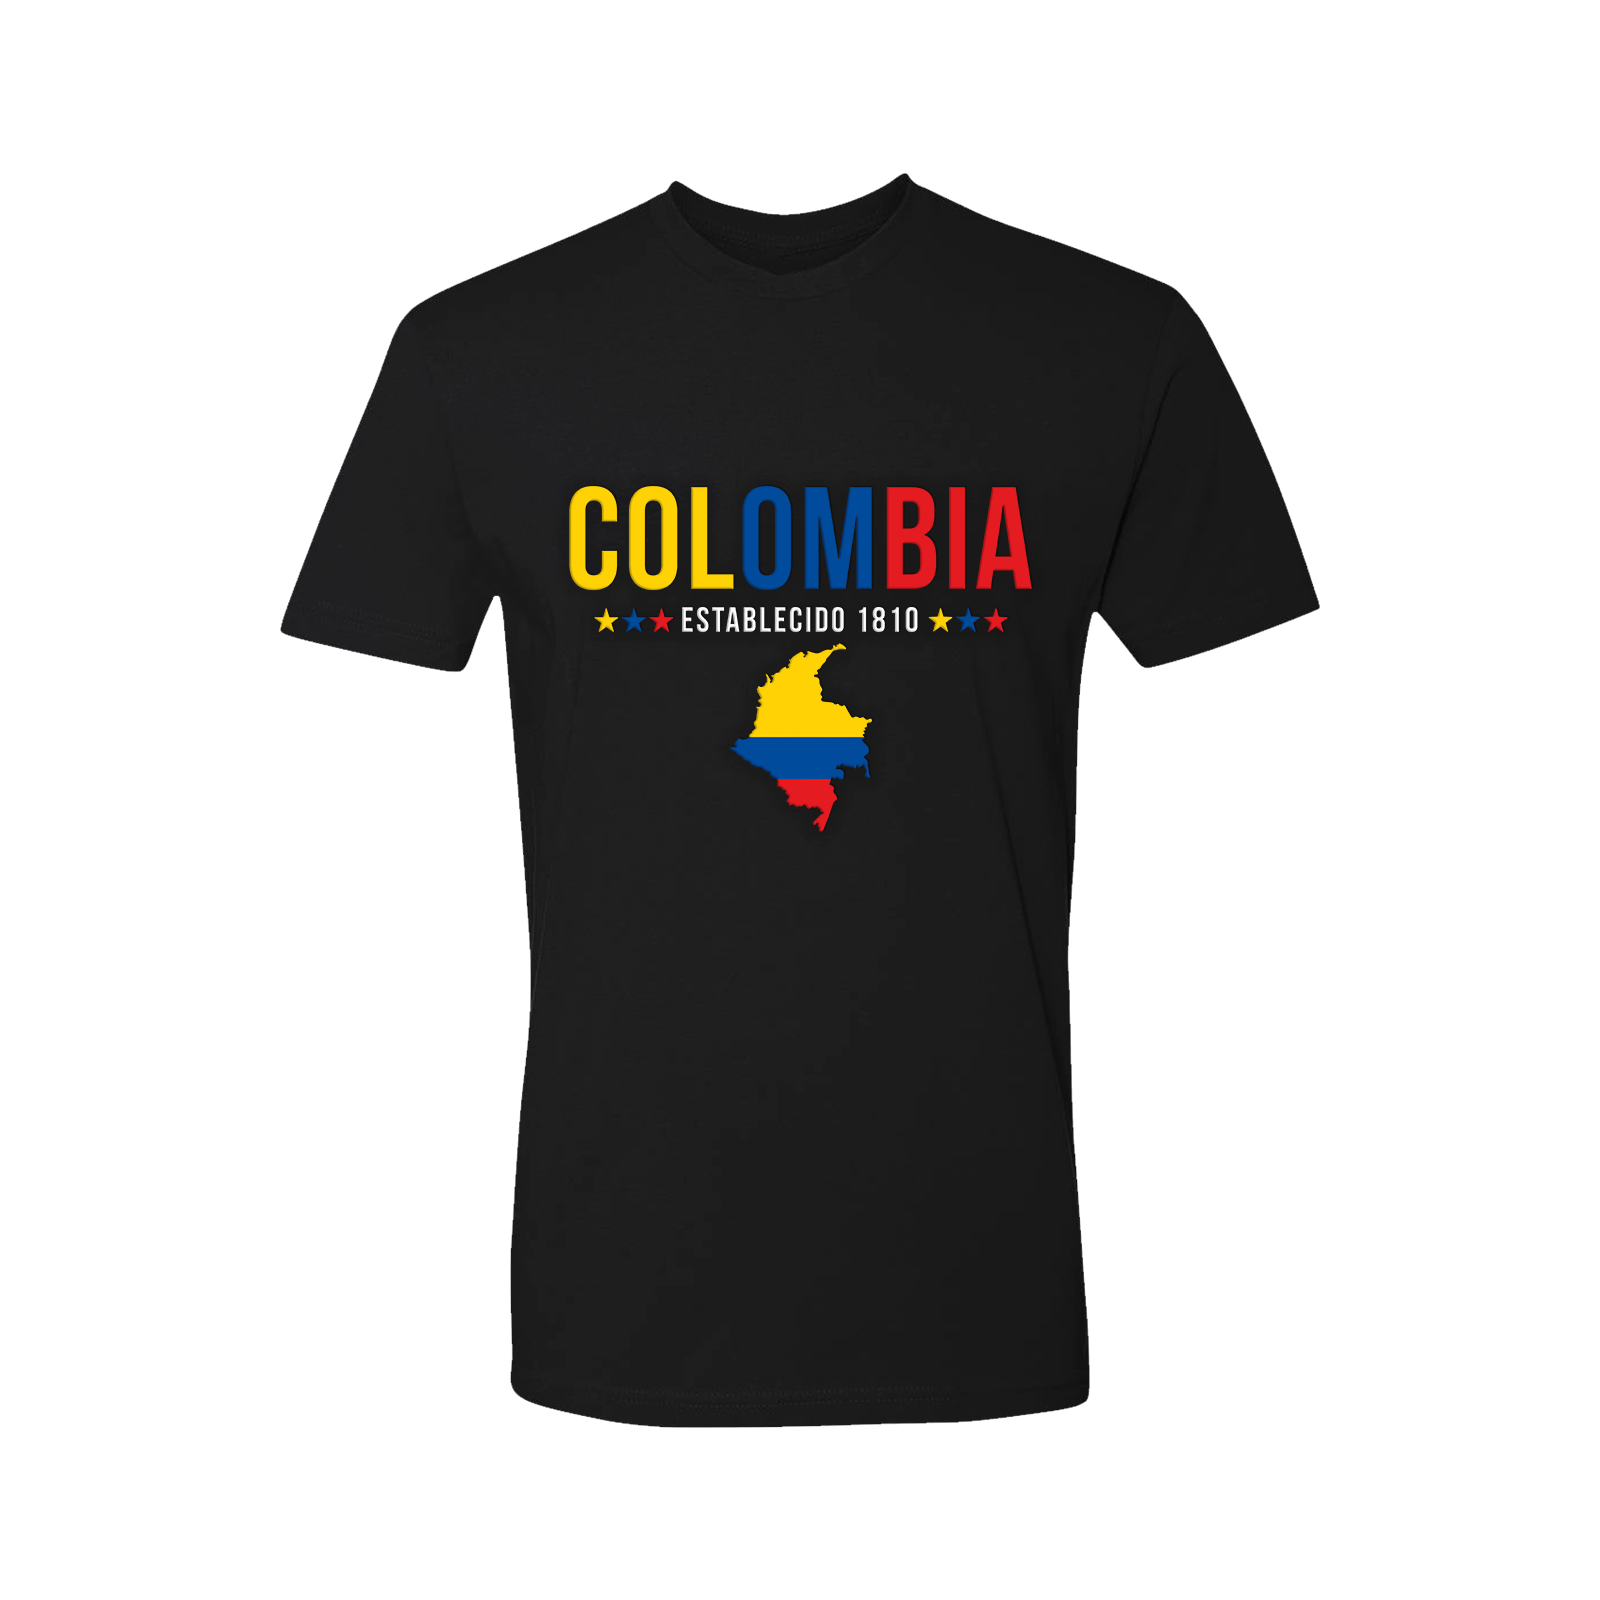 Colombia Short Sleeve Shirt - Adult